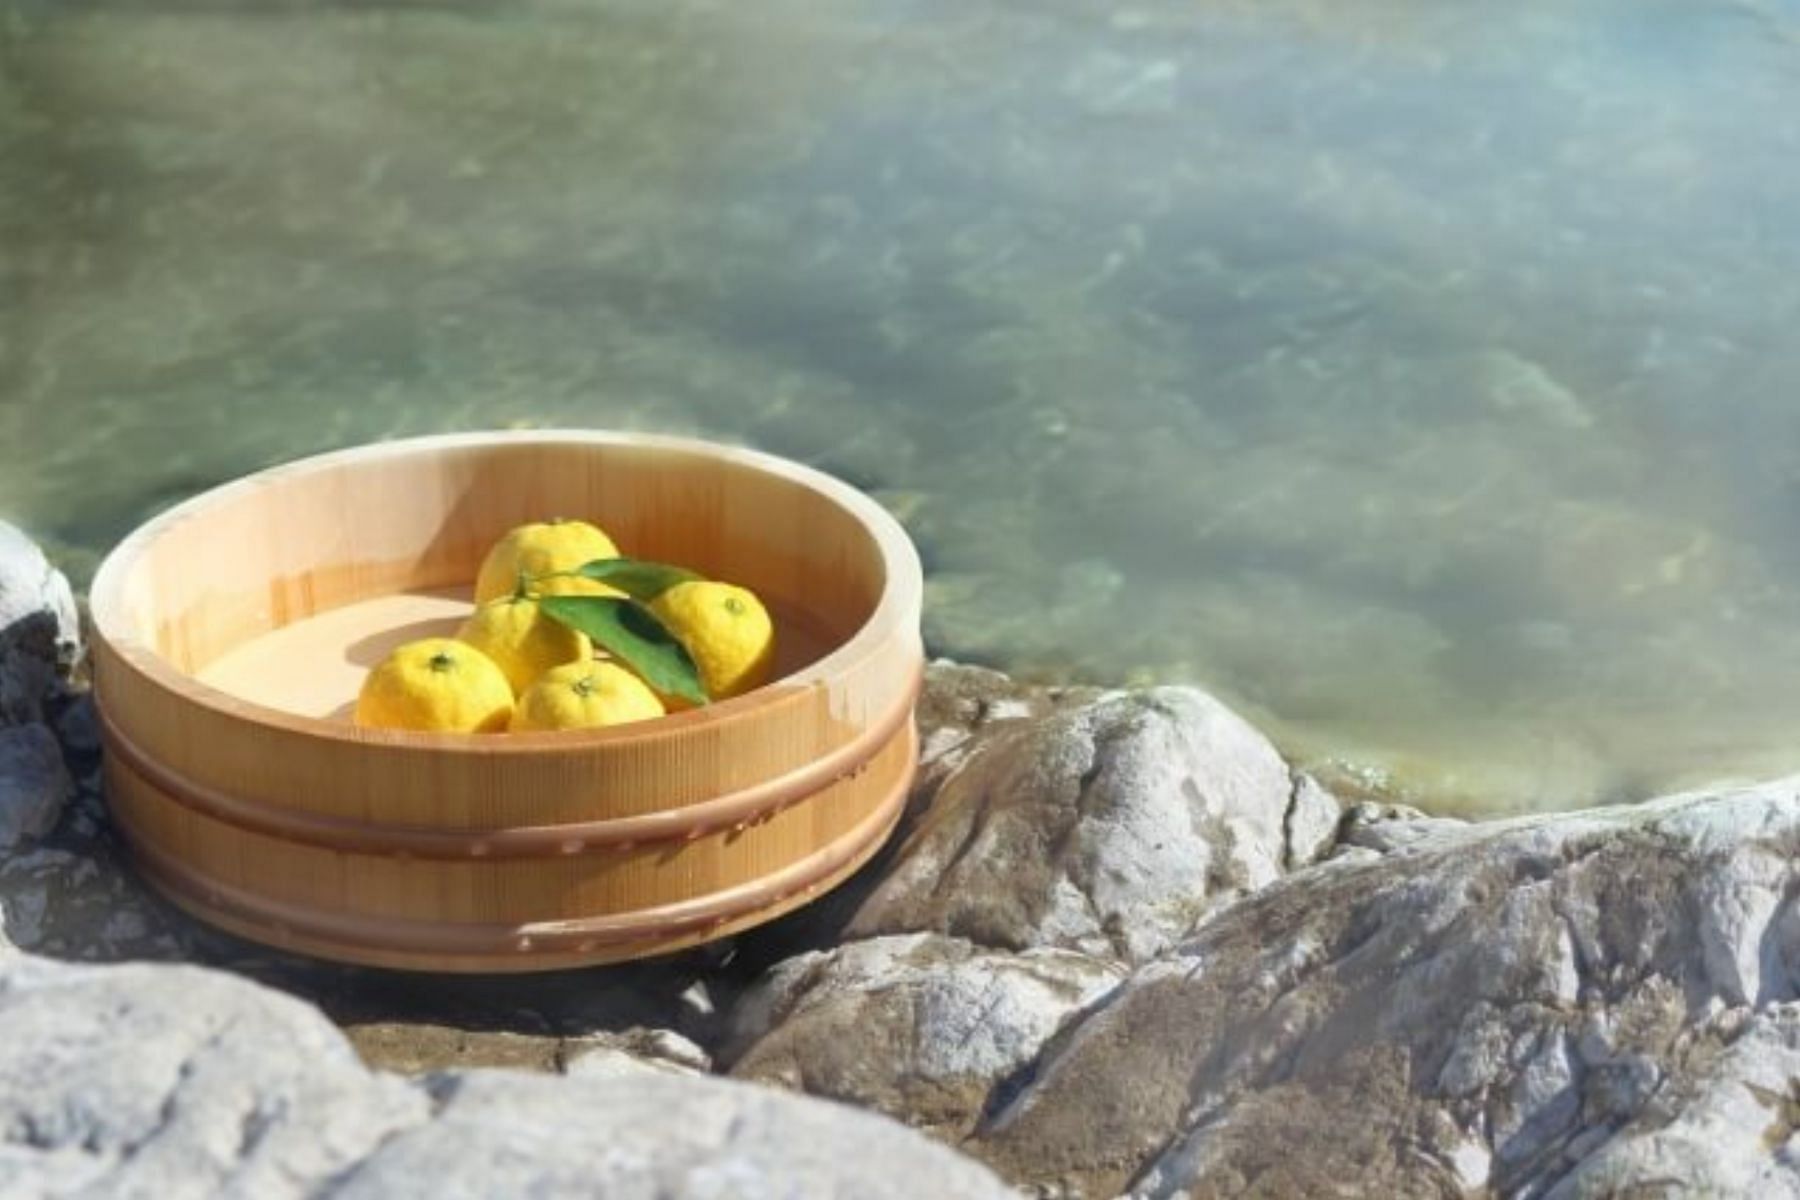 A hot bath with yuzu fruits is part of Japanese tradition to mark this day (Image via WAttention)